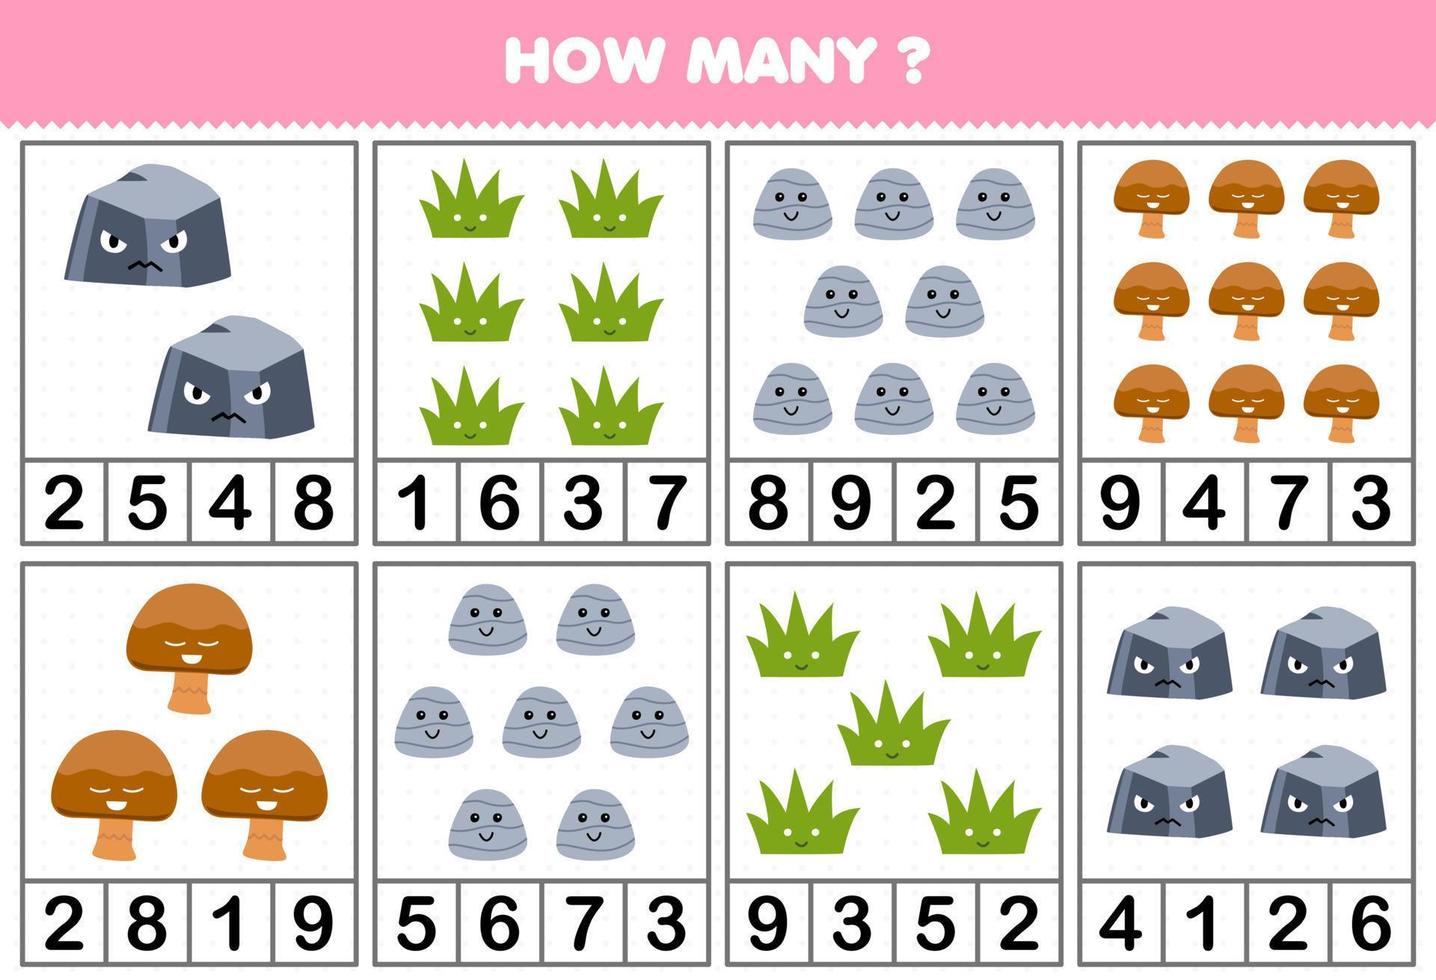 Education game for children counting how many cute cartoon stone rock grass or mushroom in each table printable nature worksheet vector